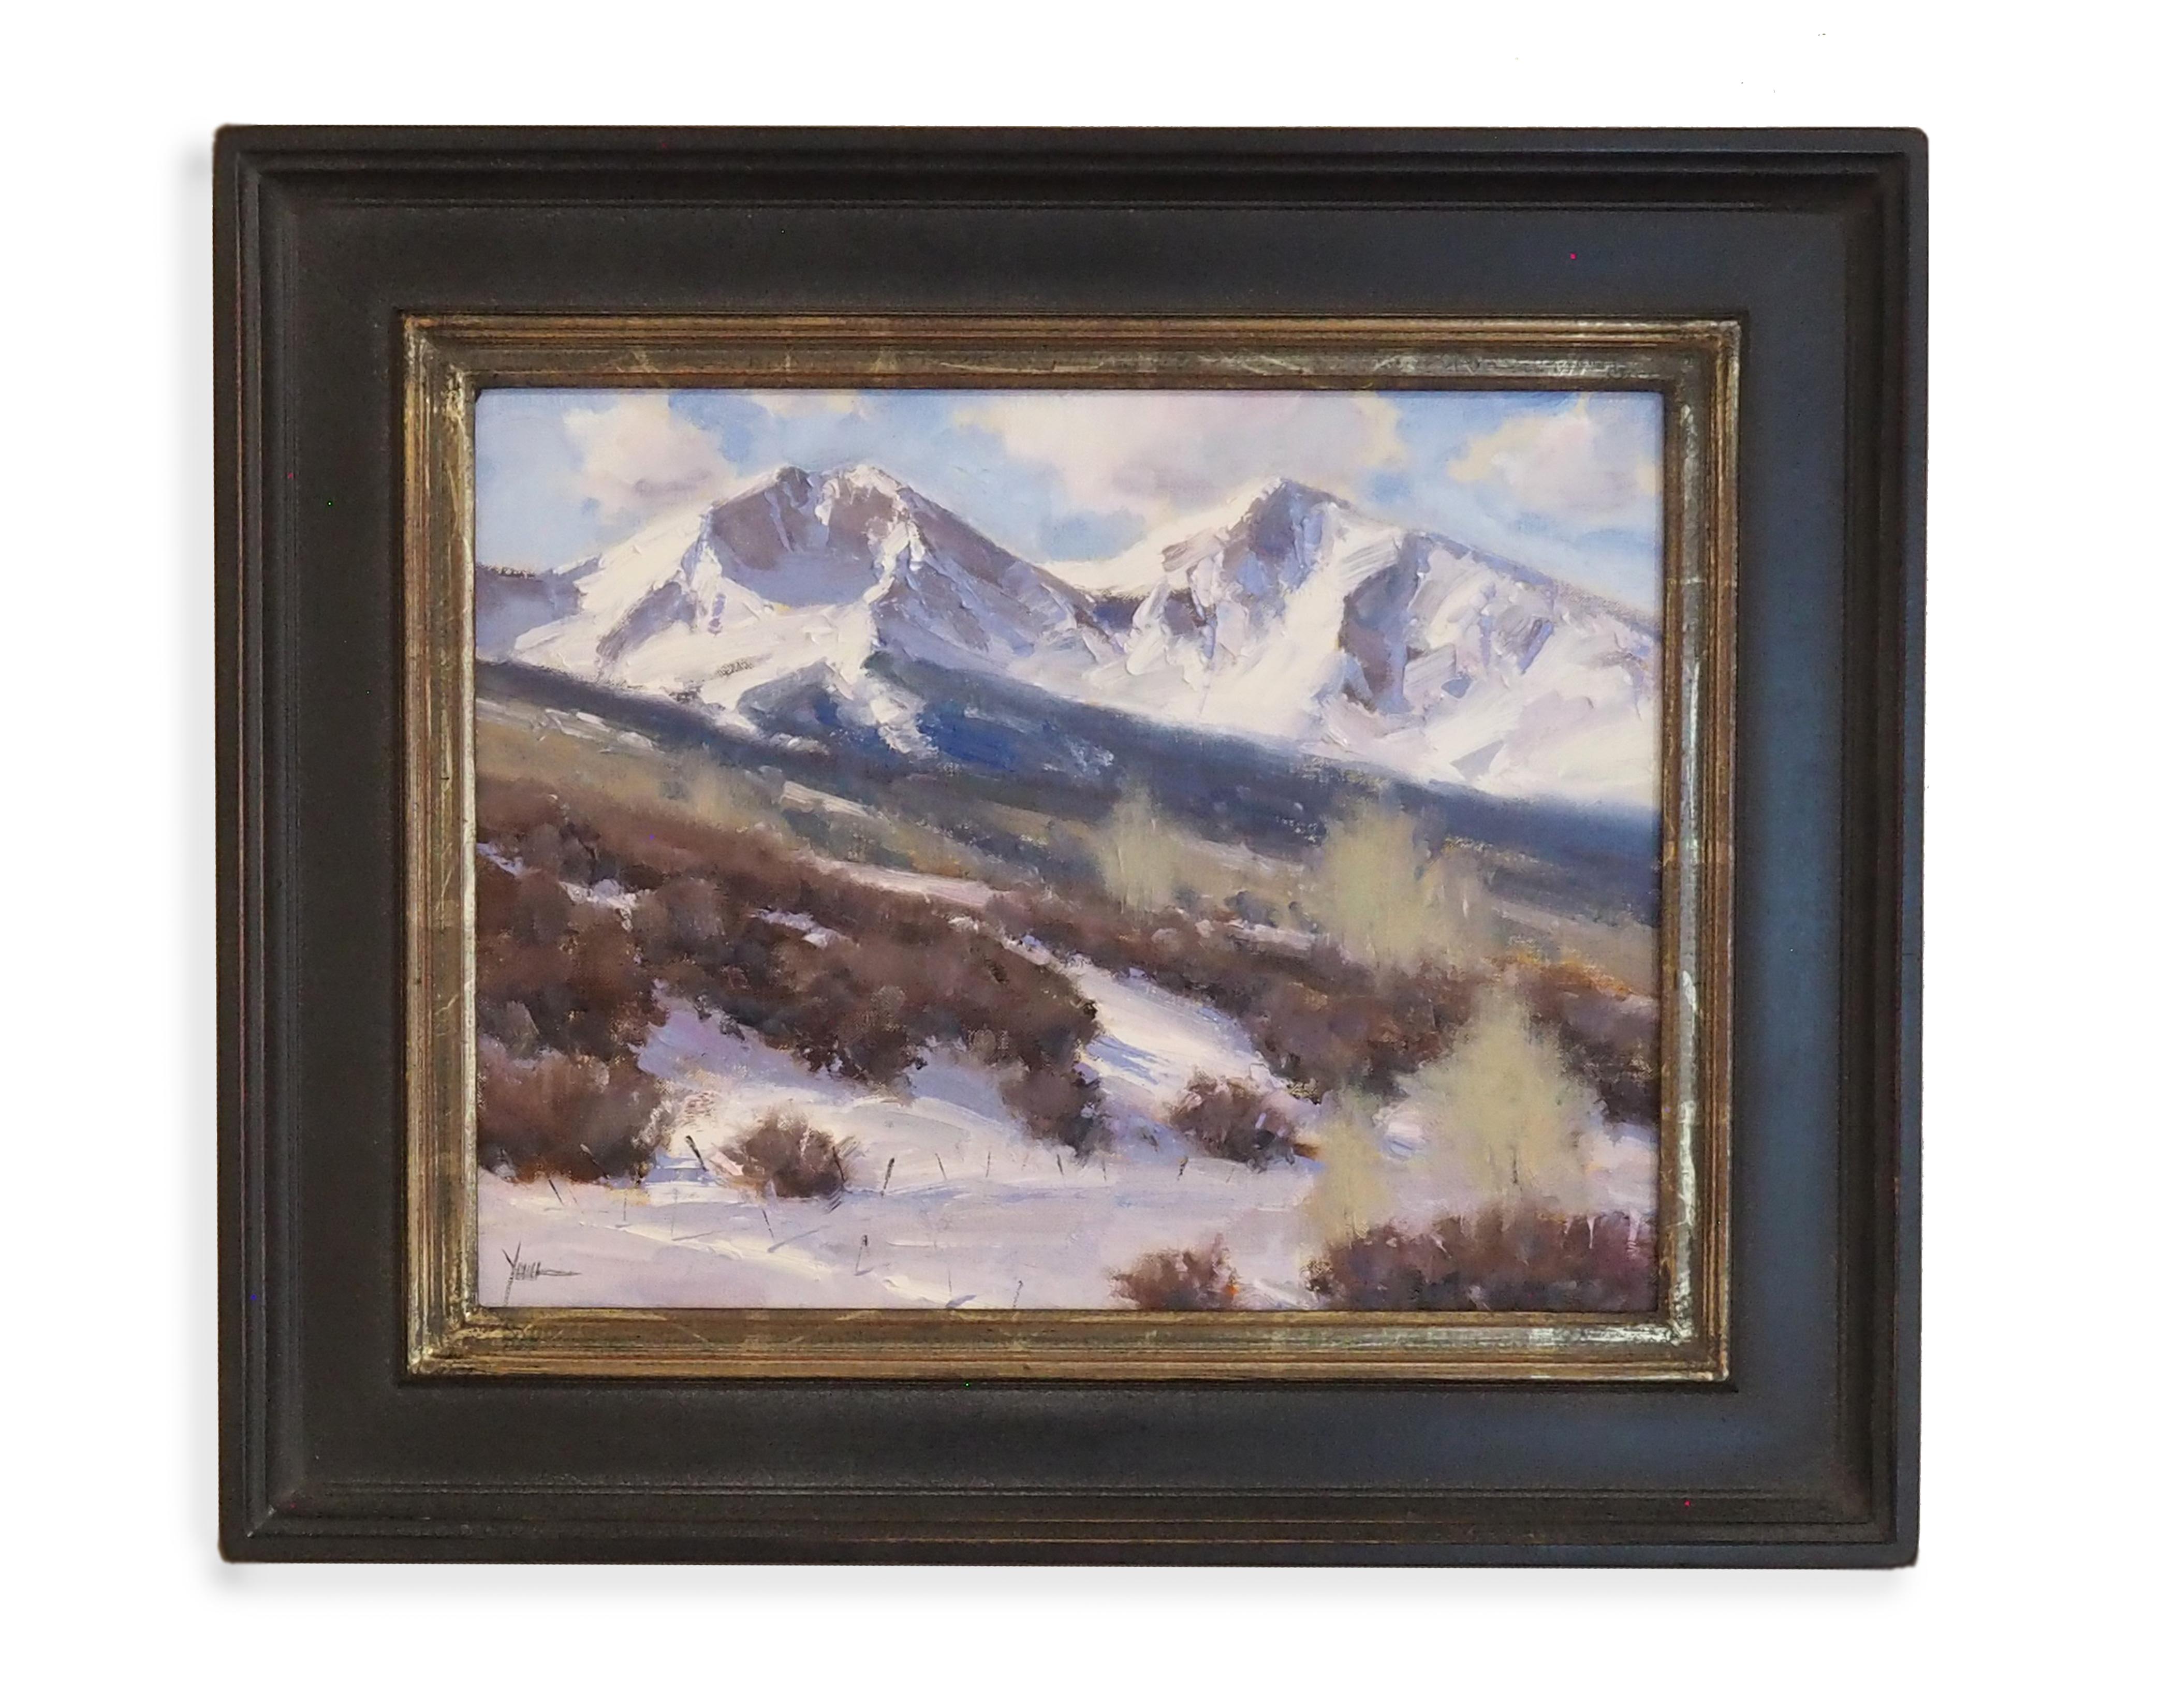 Below Sopris Mountain Ranch (colors of snow, shadows, winter) - Painting by Dan Young